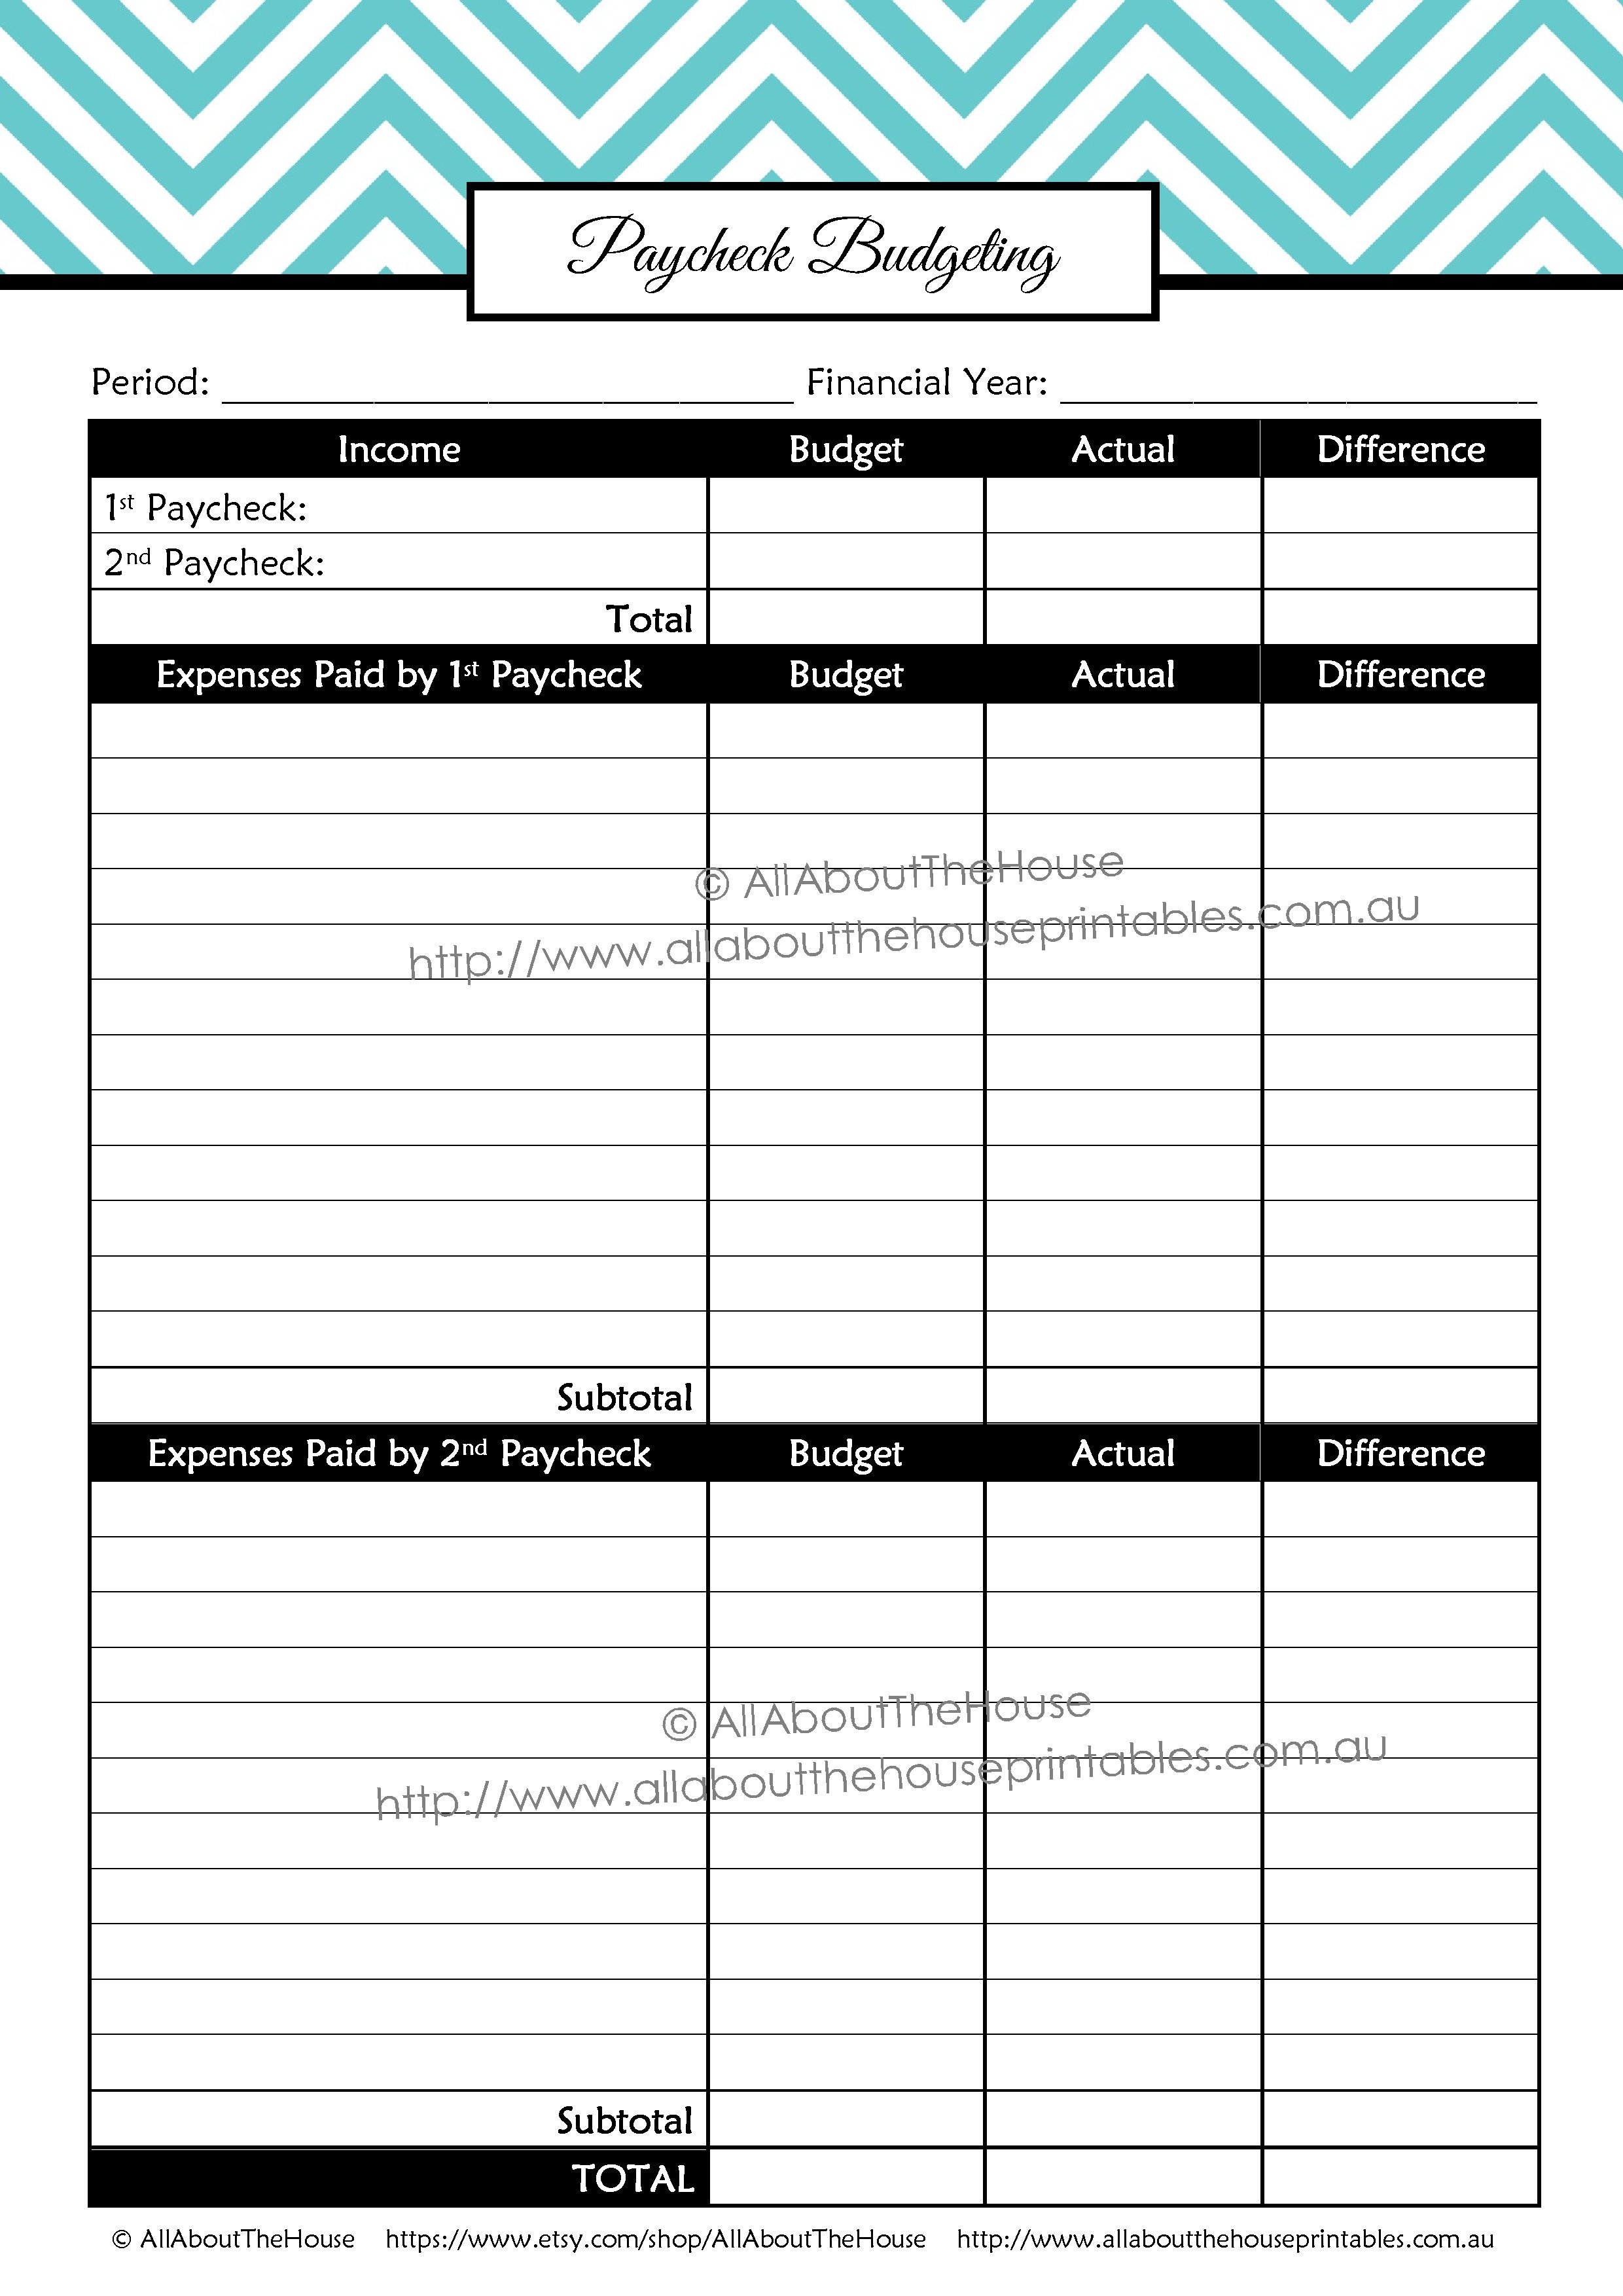 016 Image Student Budget Planner Template Plan Awful Templates Also High School Student Budget Worksheet